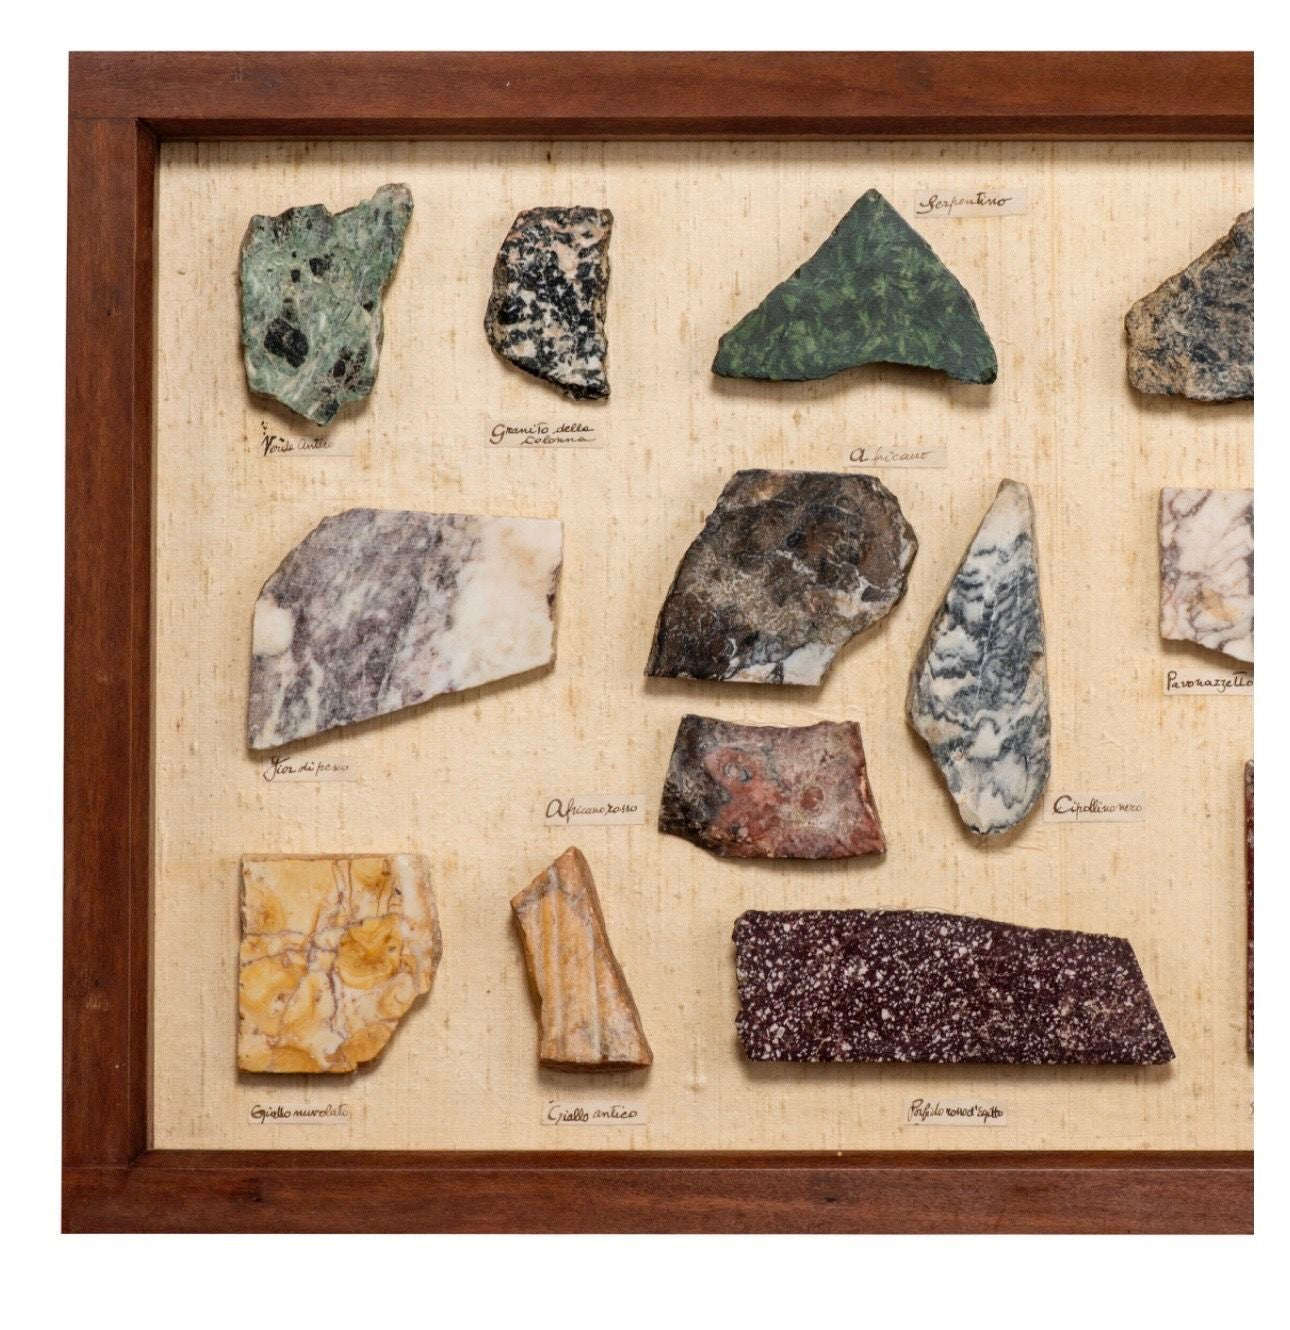 Grand Tour Framed Porphyry and Marble Specimens, 19th Century